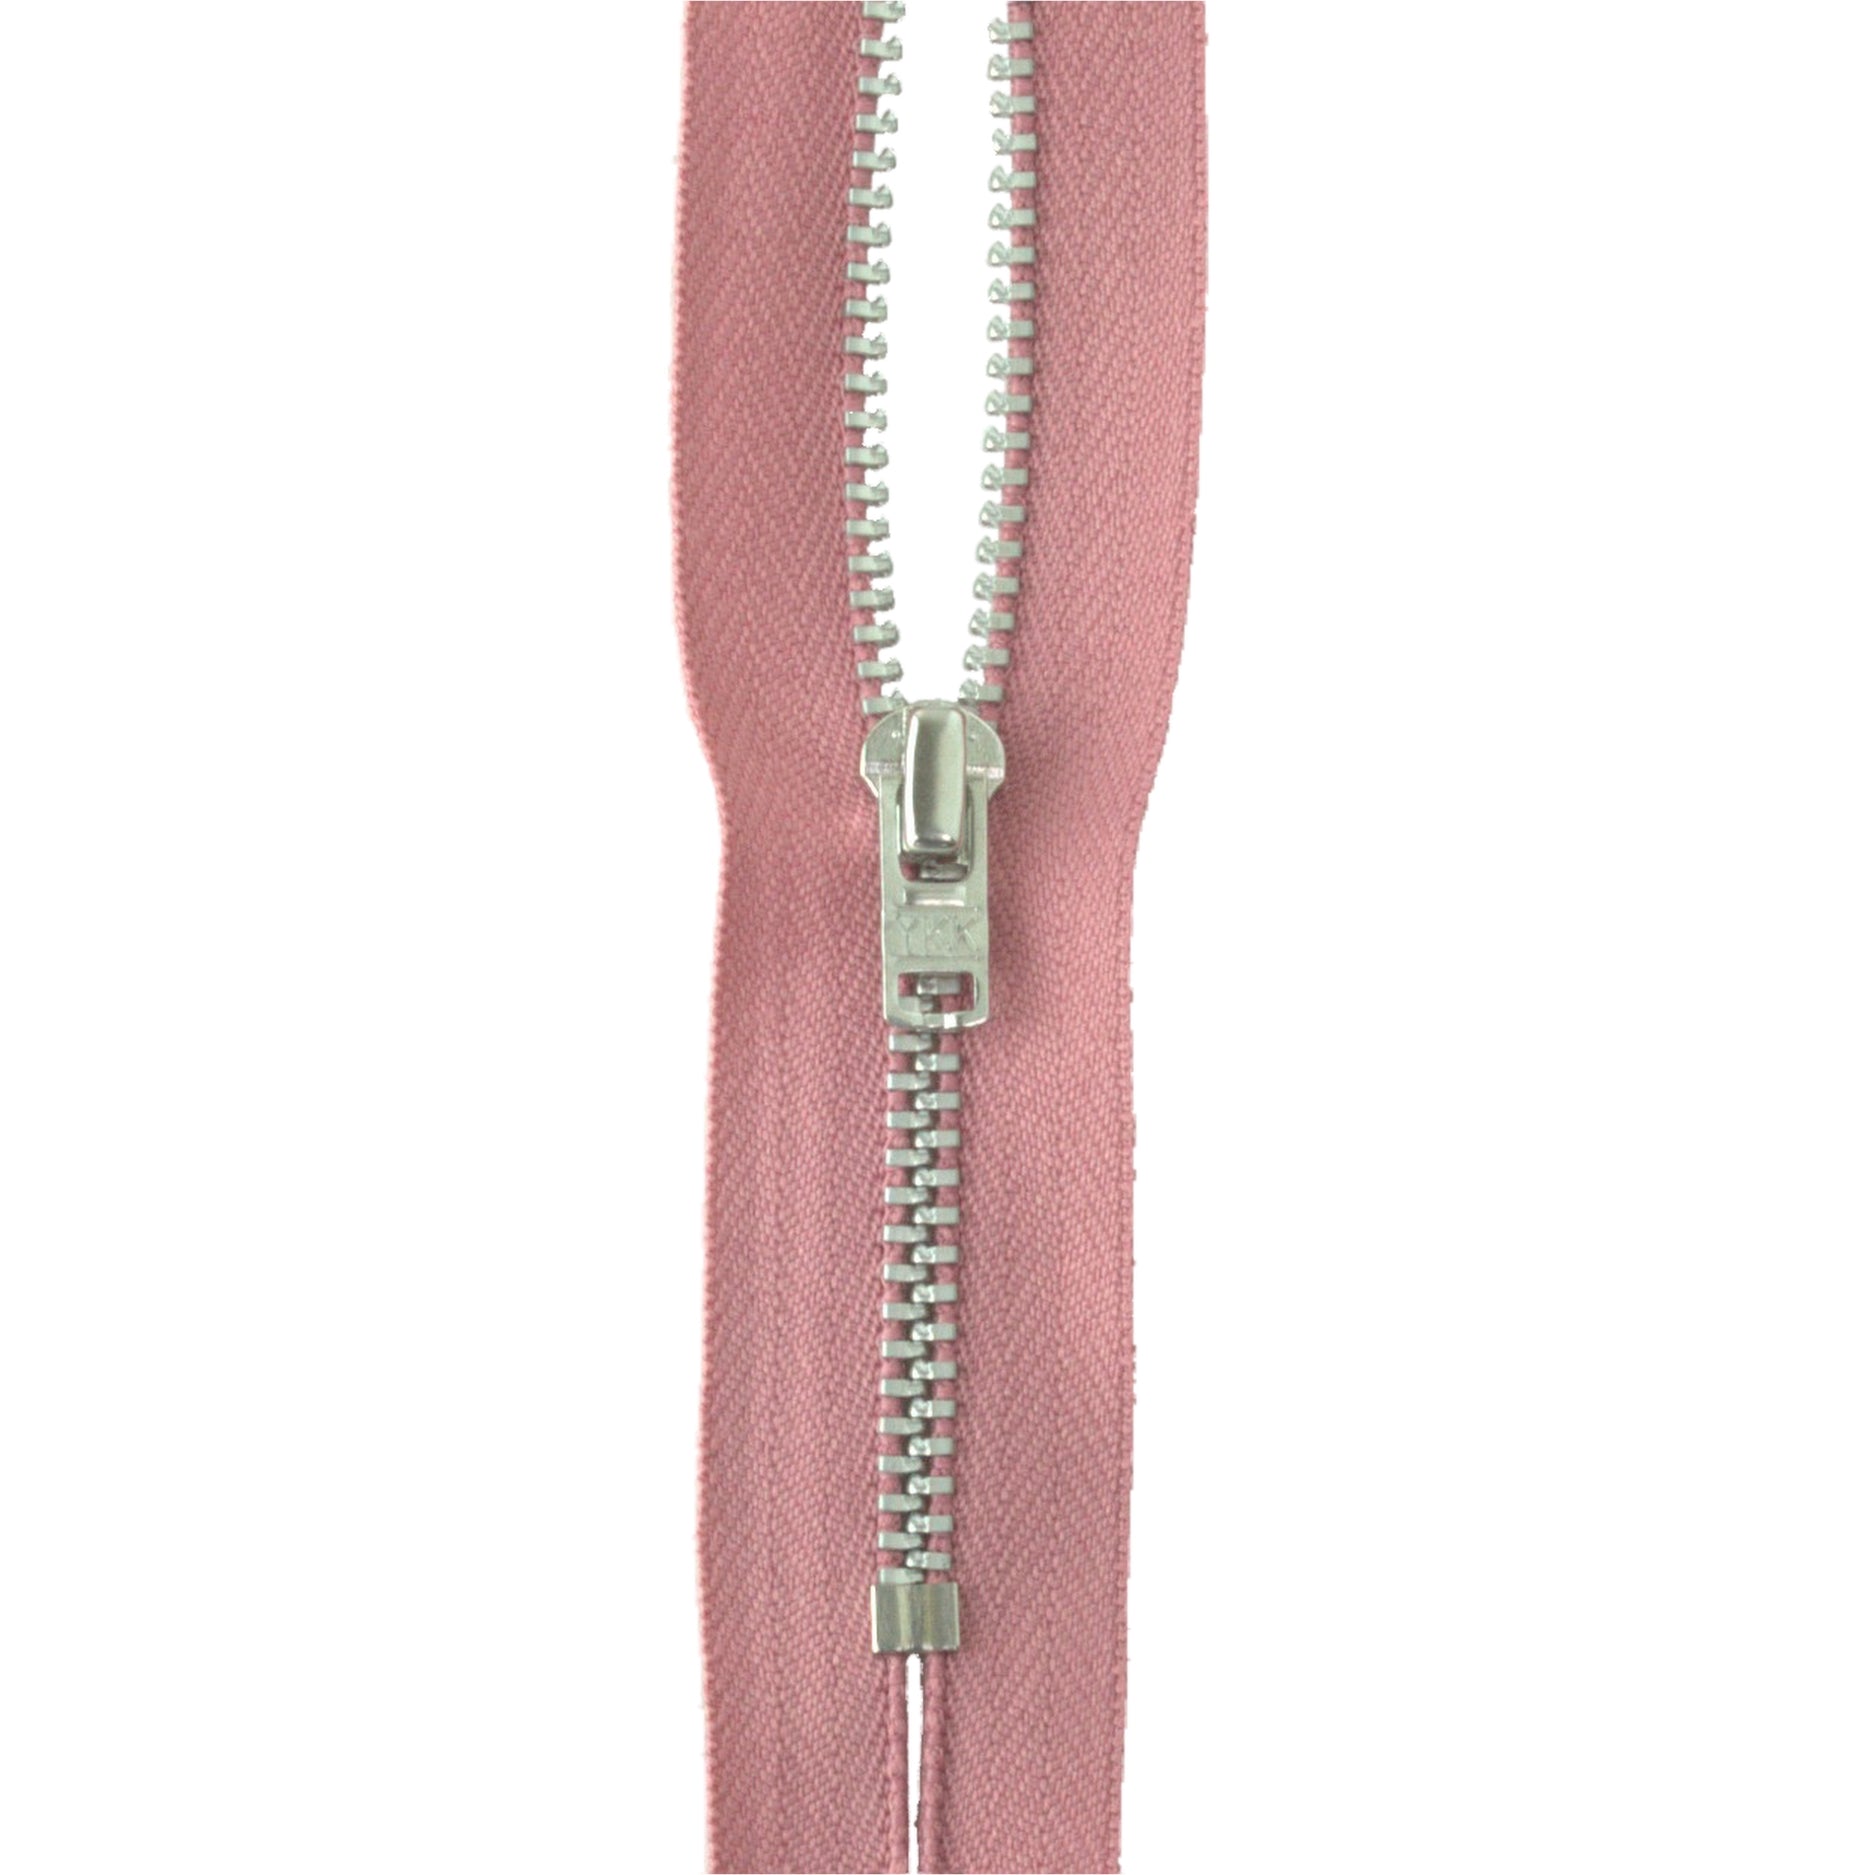 YKK silver tooth Metal Dress Zips - dusky pink from Jaycotts Sewing Supplies